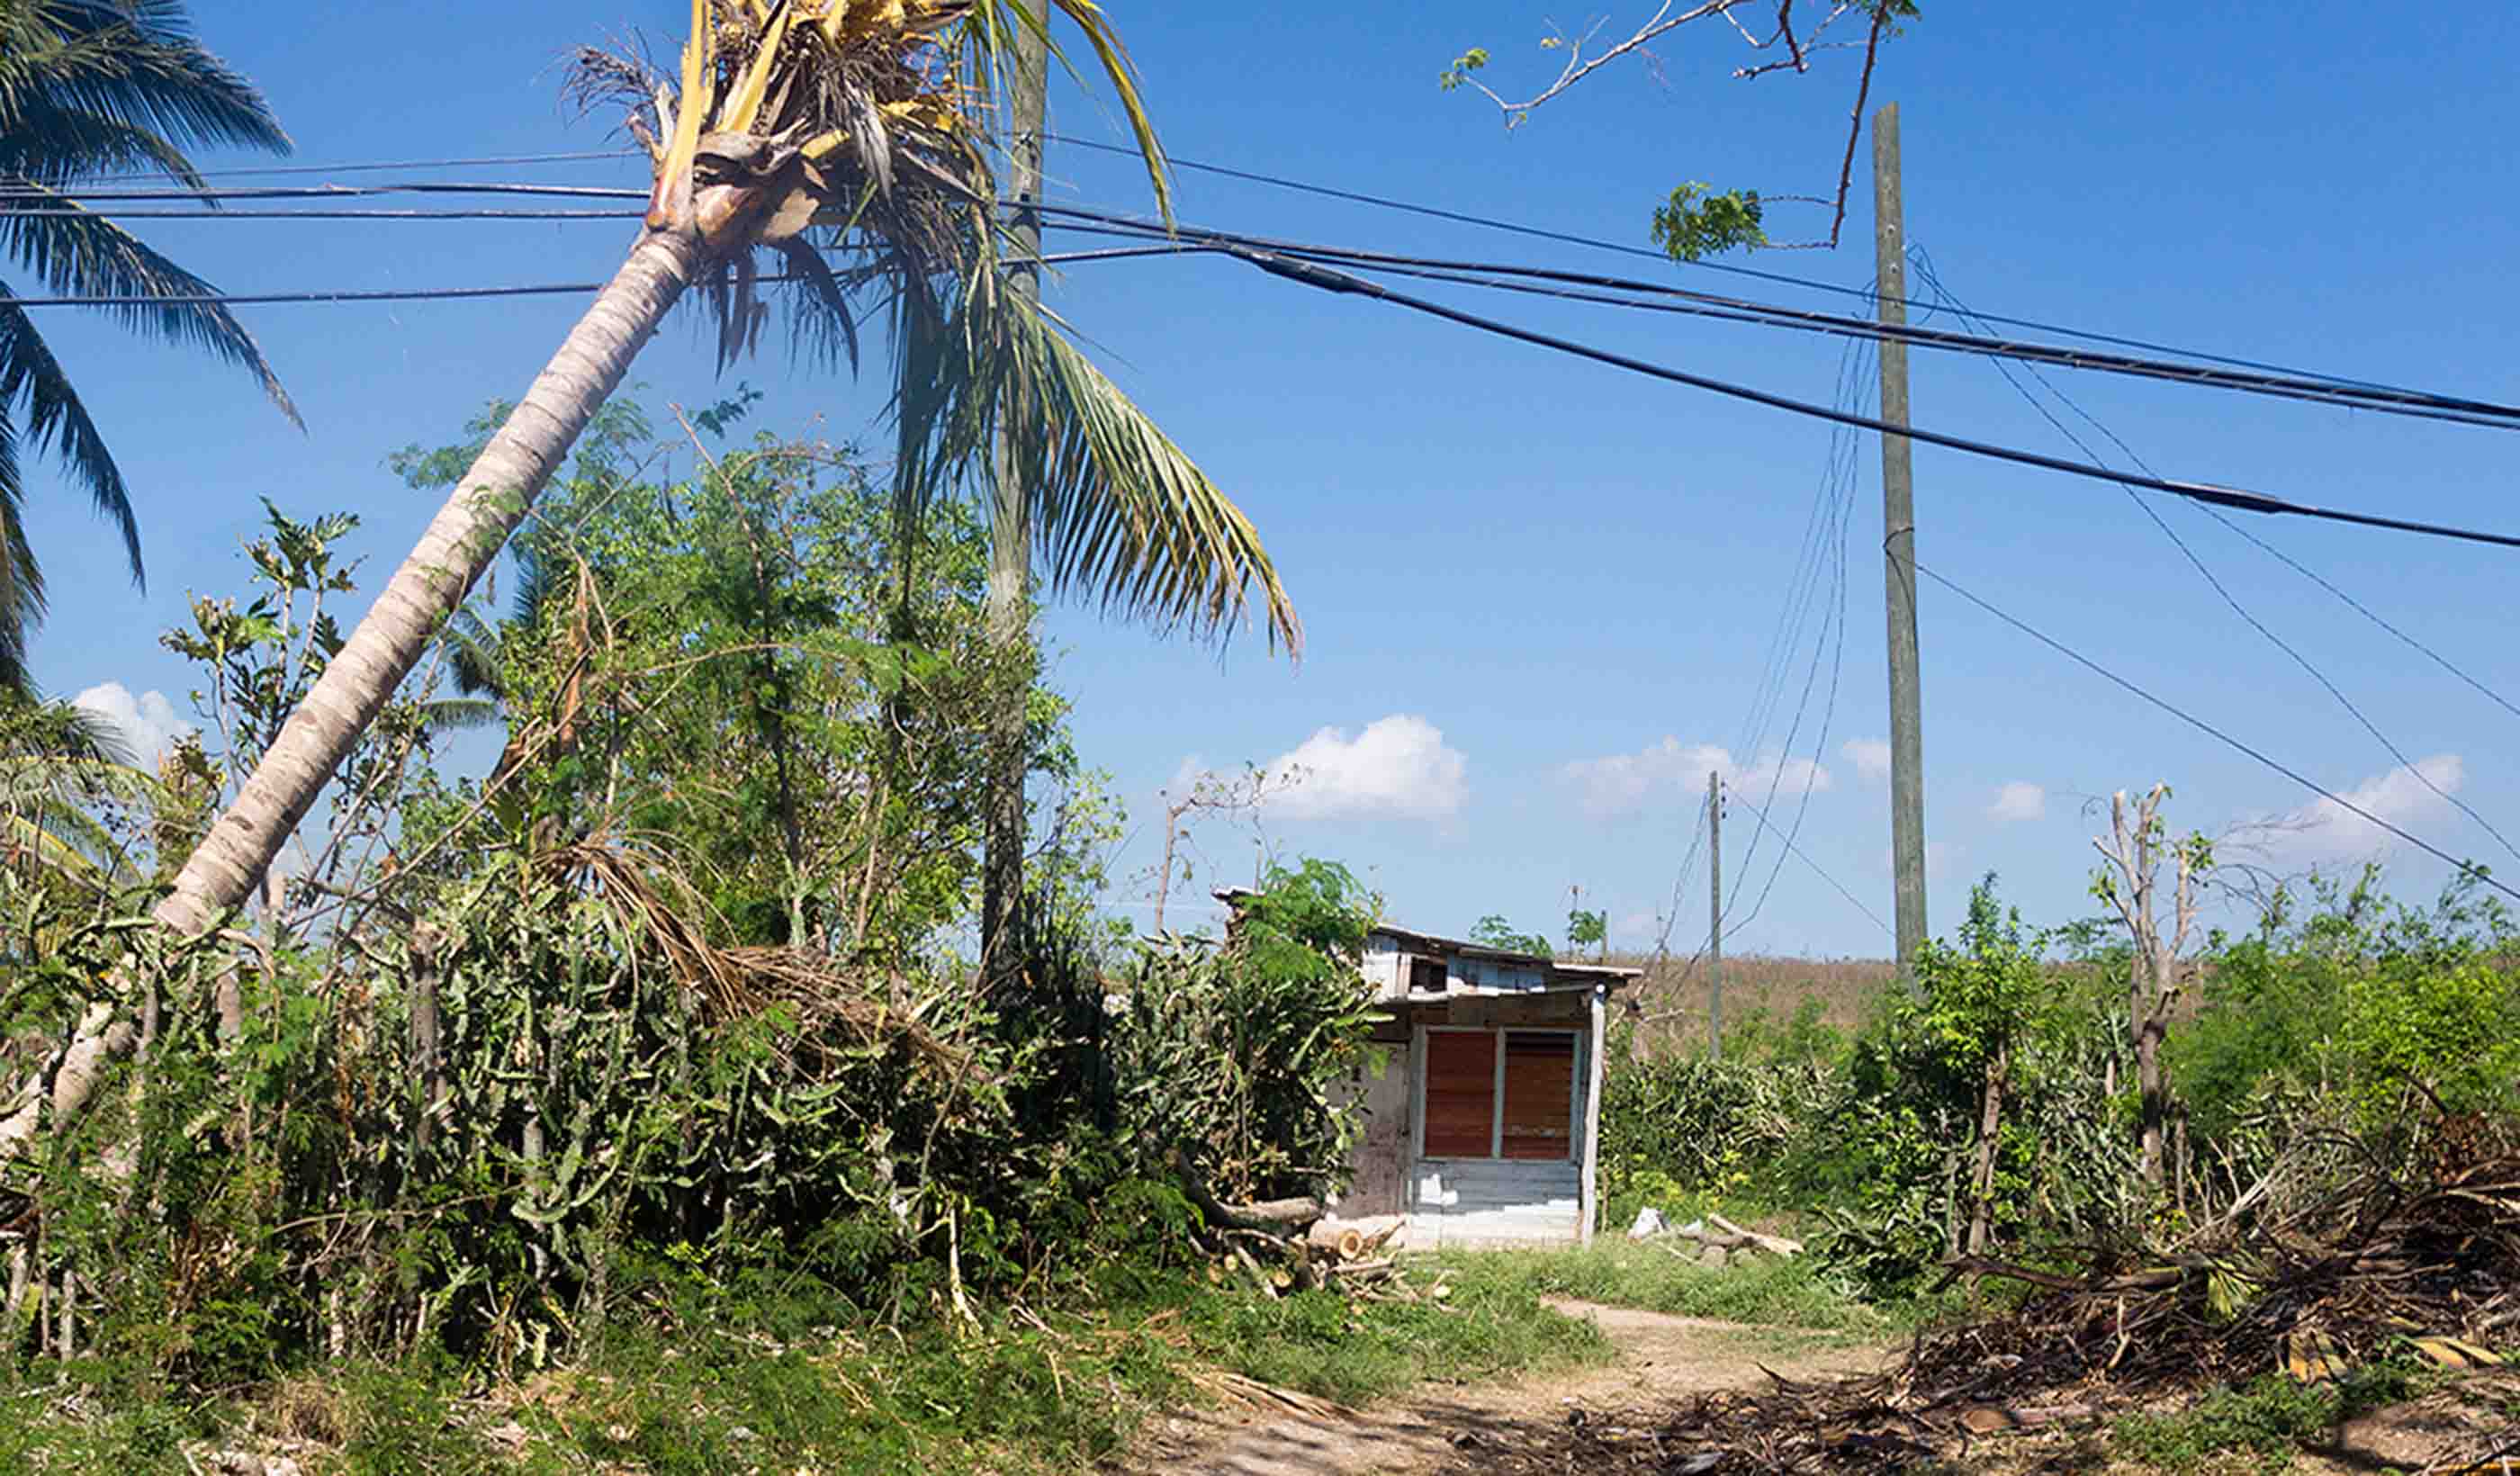 Can Caribbean islands modernize their way to affordable, resilient energy grids?